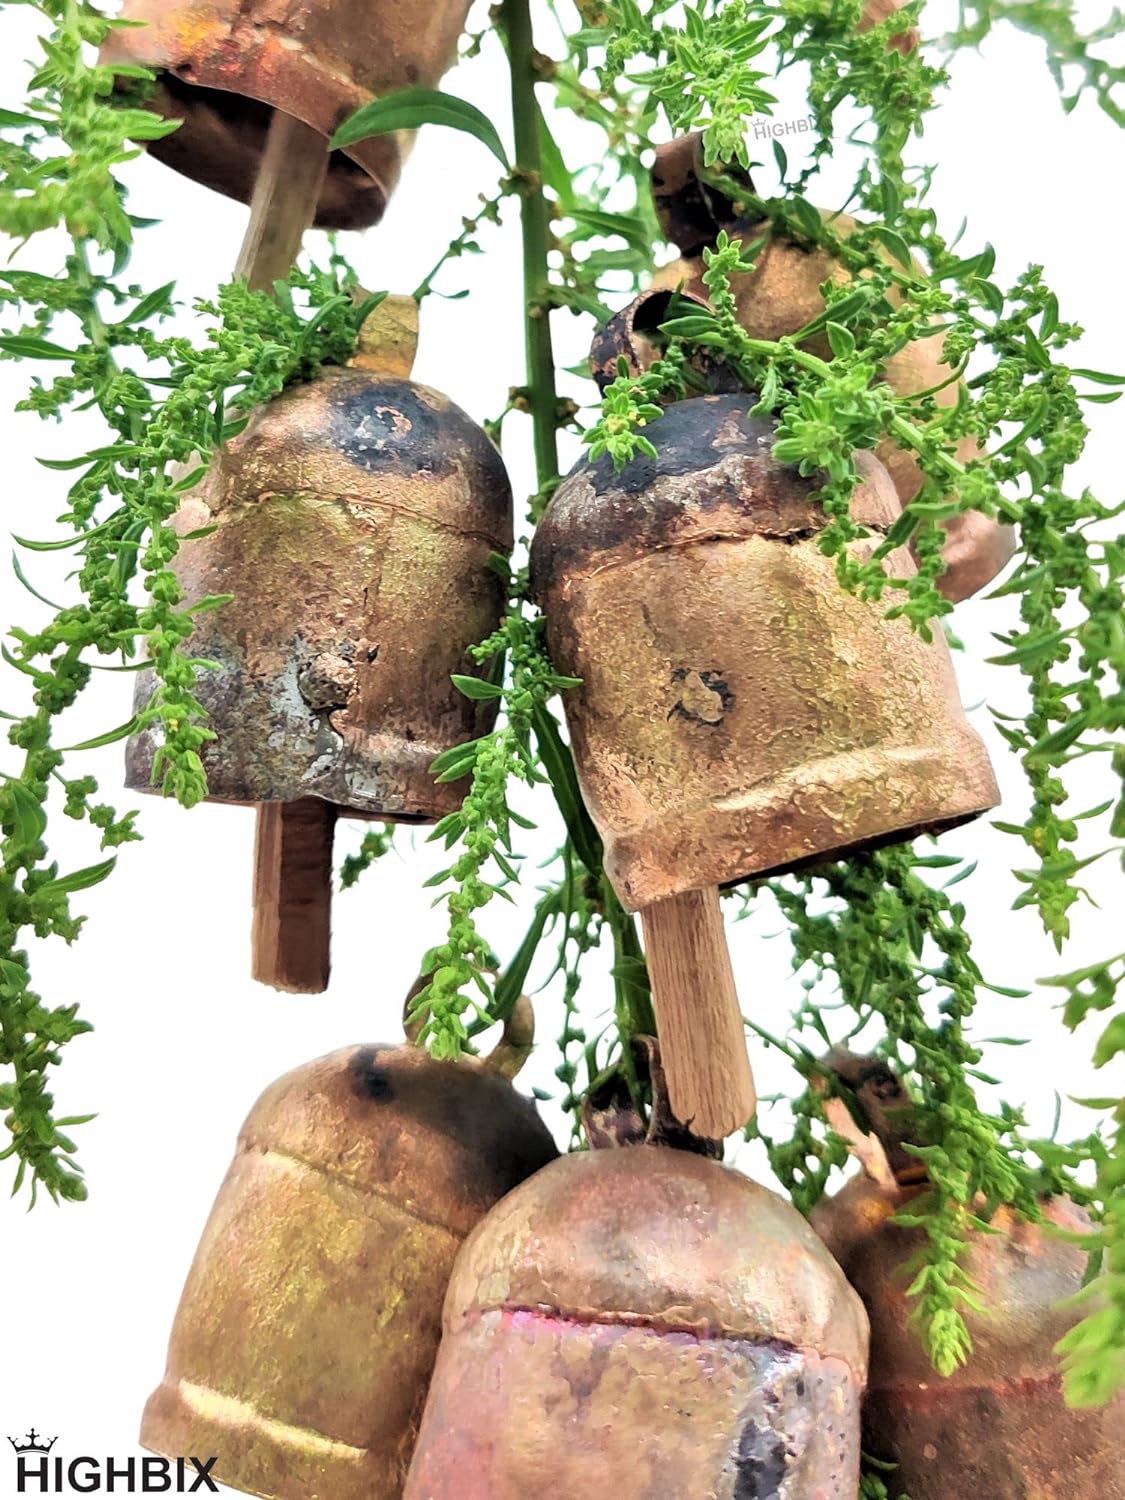 Country Rustic Harmony Cow Bells